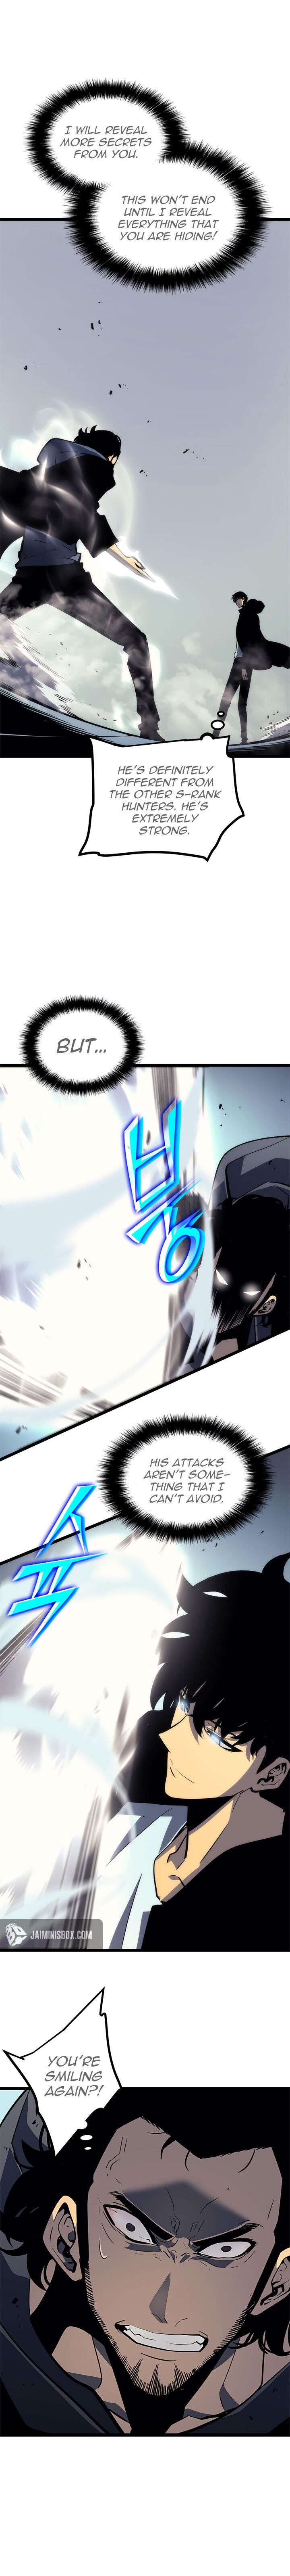 read Chapter 93 online